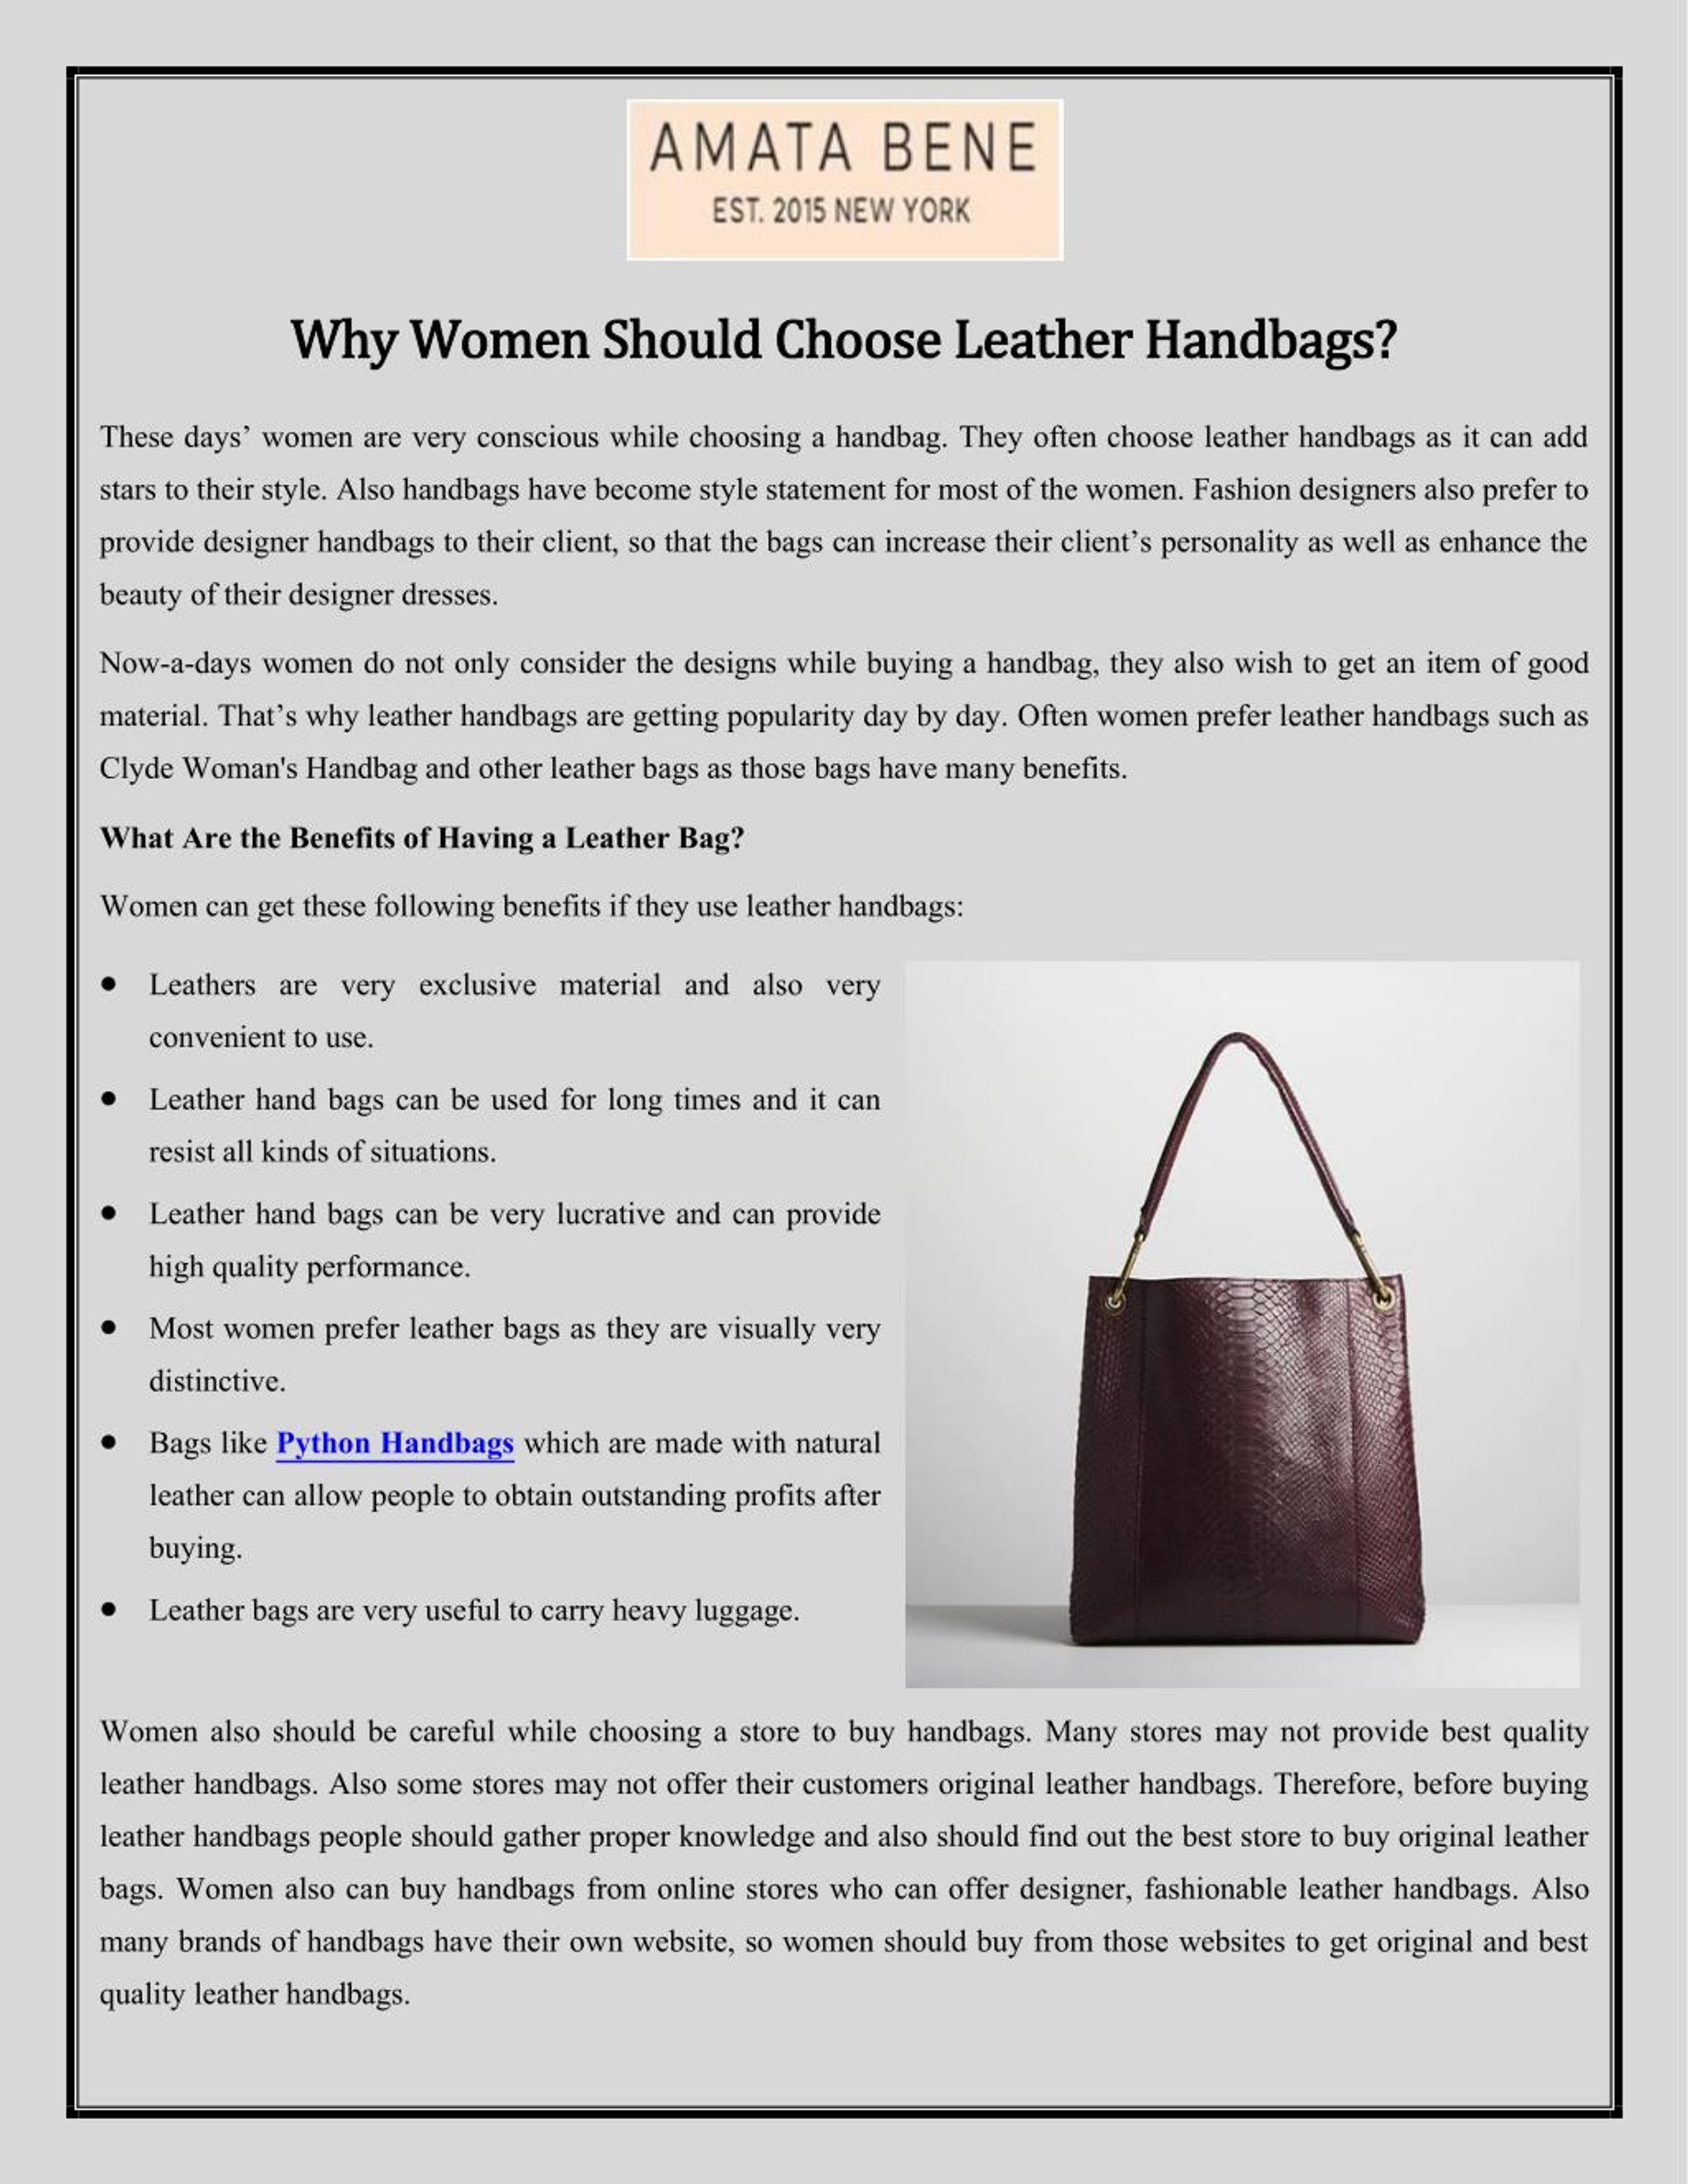 PPT - Why Women Should Choose Leather Handbags? PowerPoint